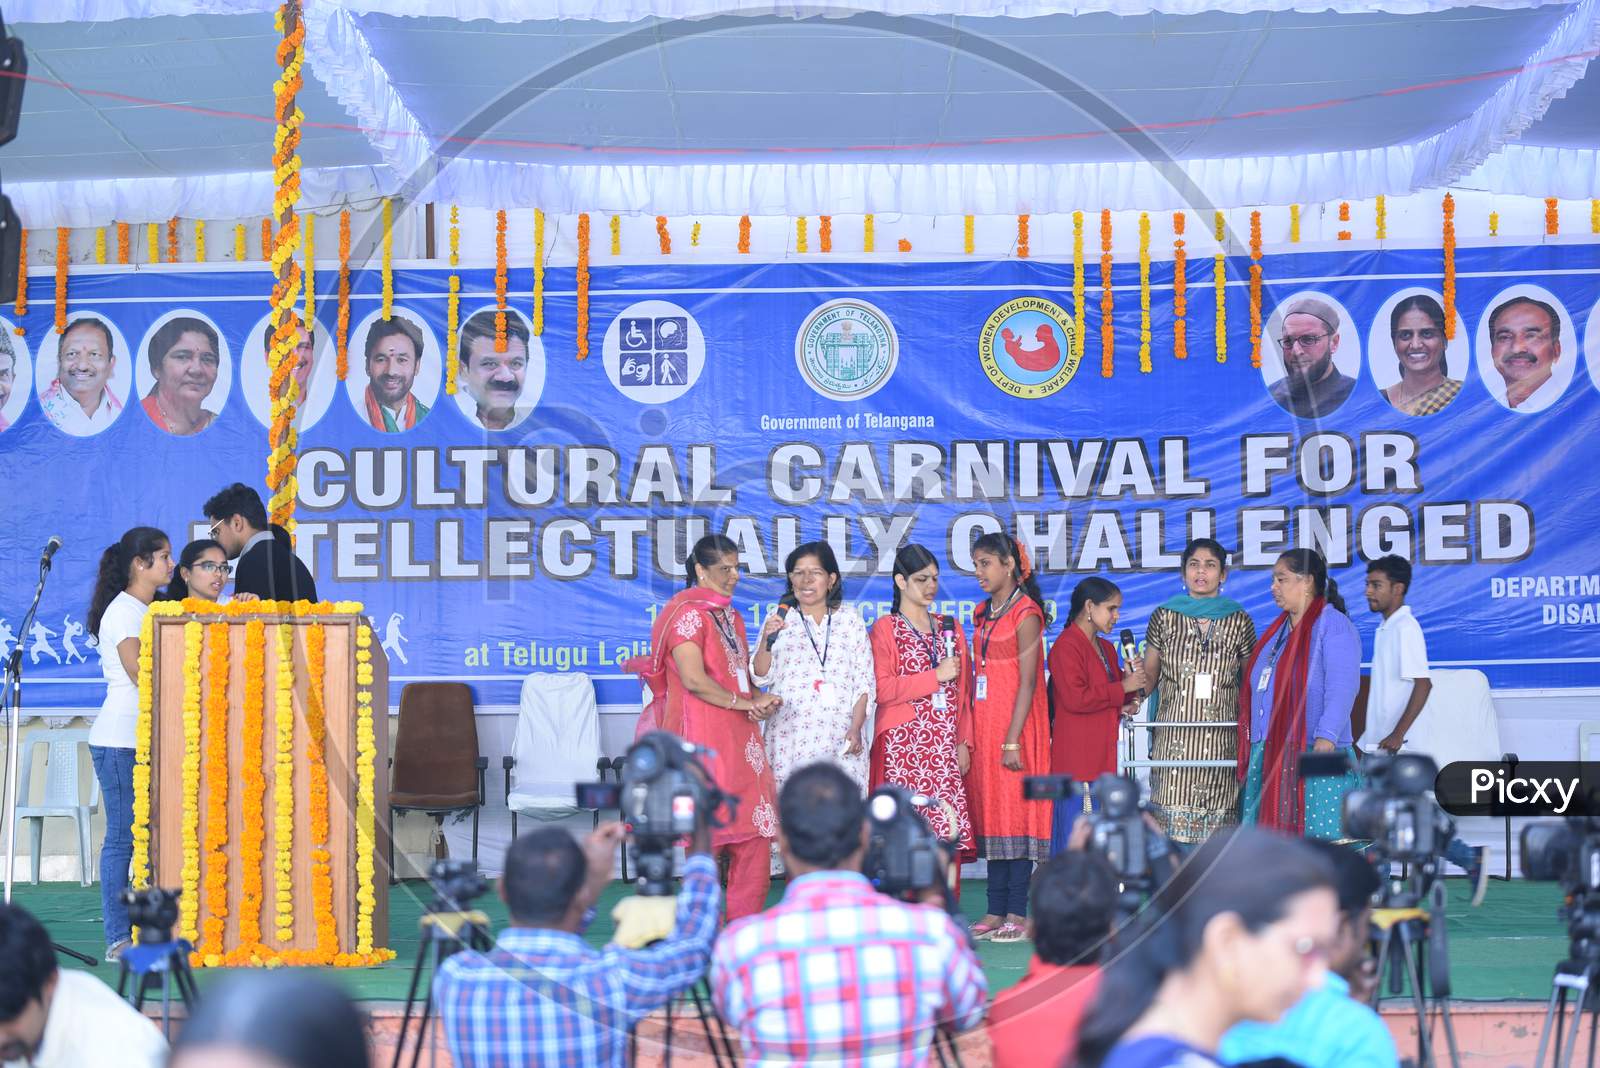 Cultural Carnival for Intellectually challenged